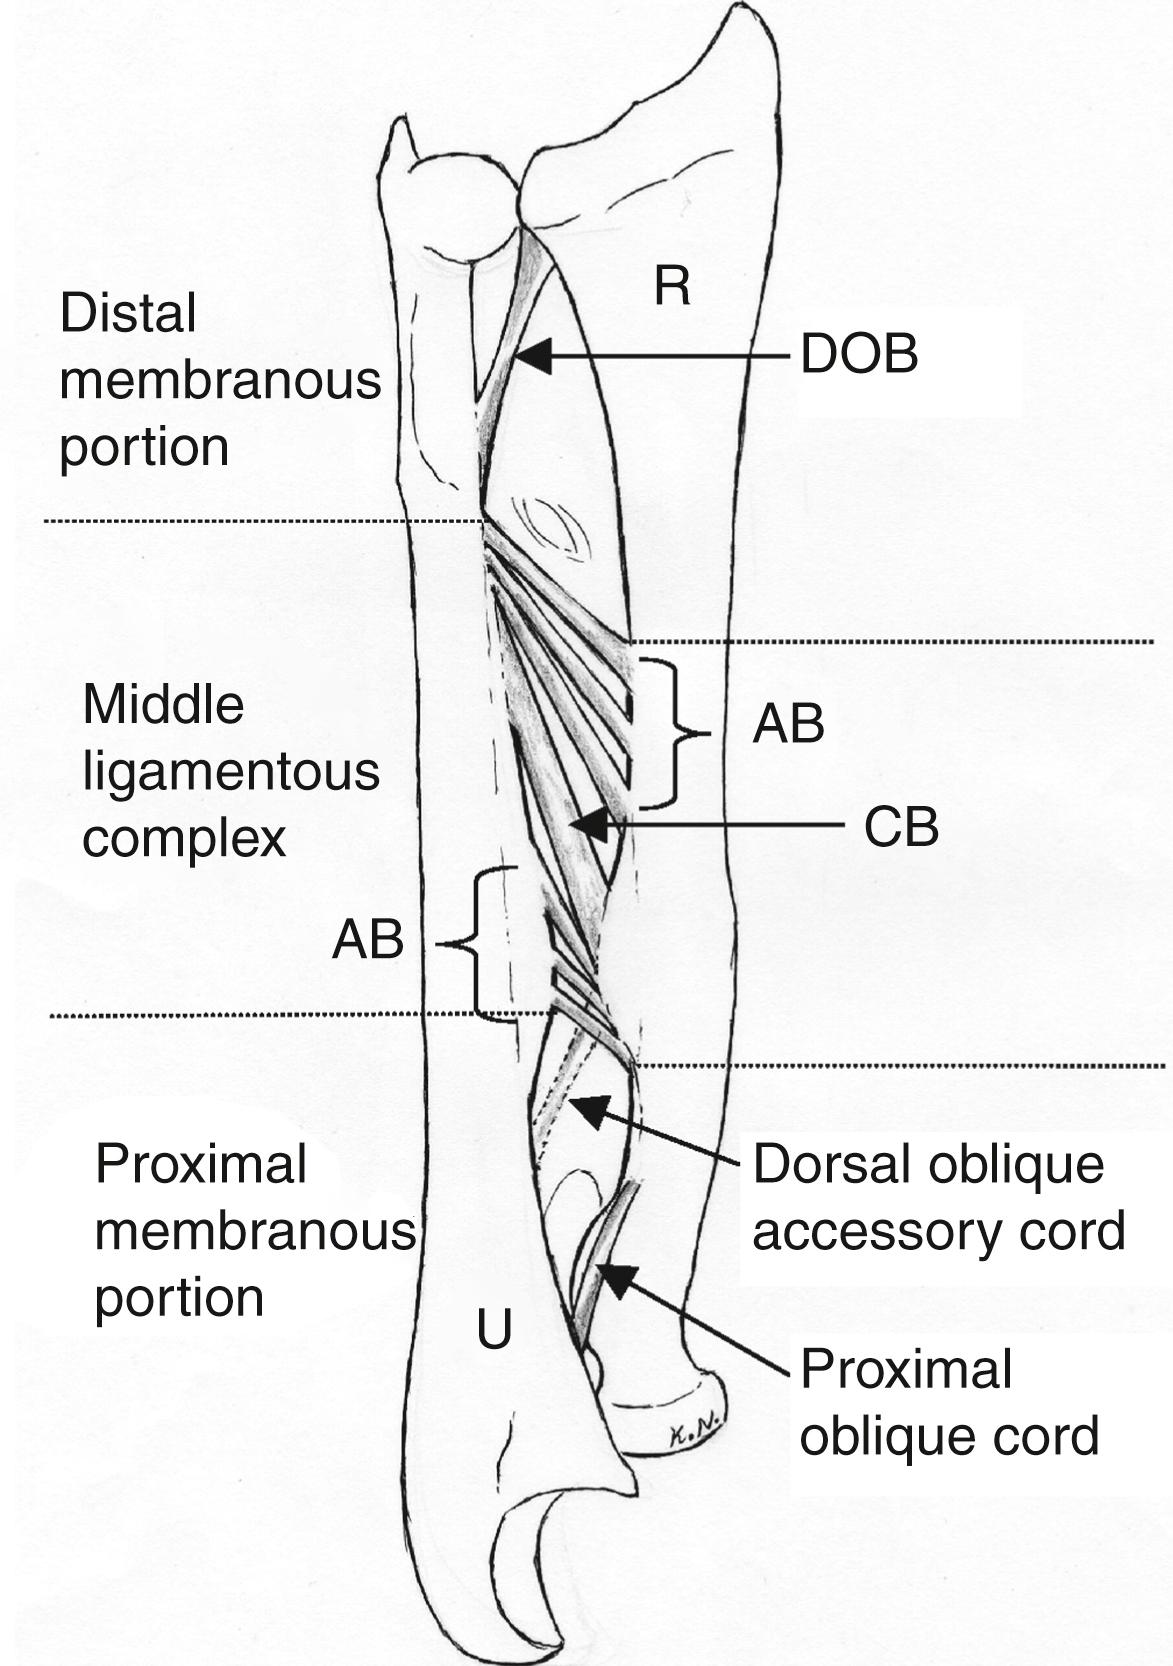 Fig. 58.1, Depiction of the structure of the interosseus membrane anatomy. AB , Accessory band; CB , central band; DOB , distal oblique bundle; R , radius; U , ulna.